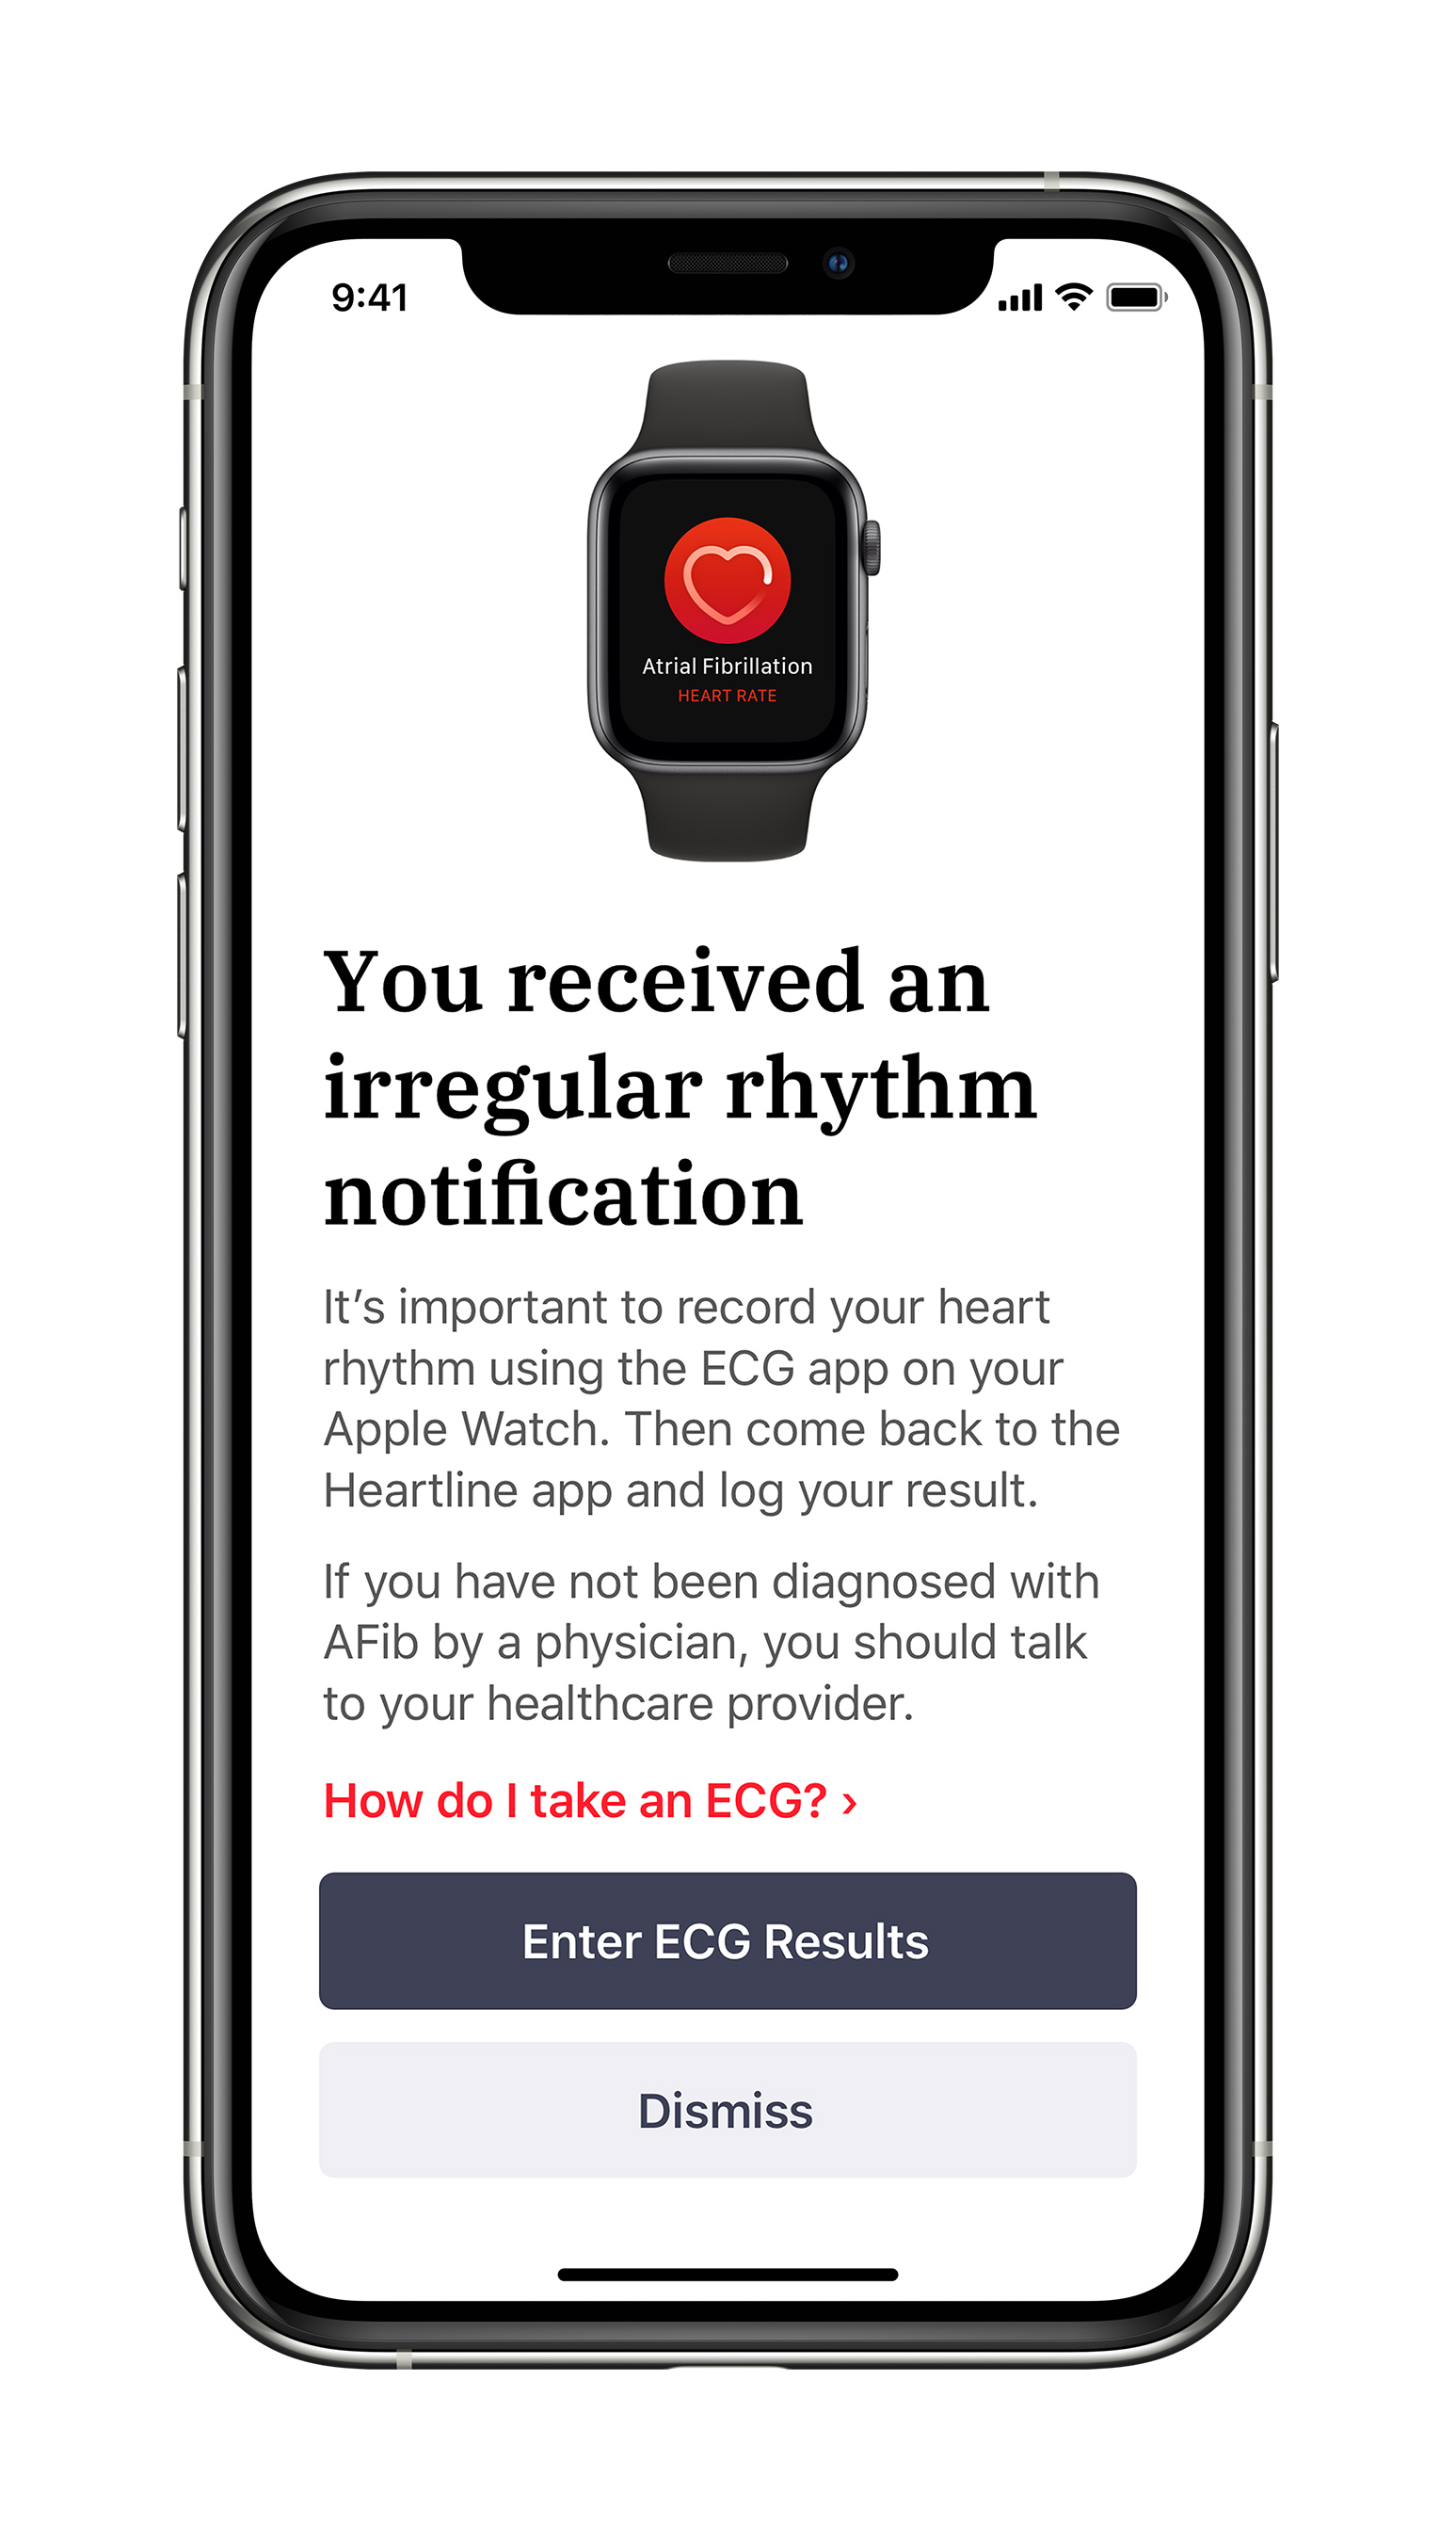 If a study participant in the watch-wearing study arm receives an irregular rhythm notification, they will be prompted through the Heartline™ Study app to complete an ECG on their Apple Watch.